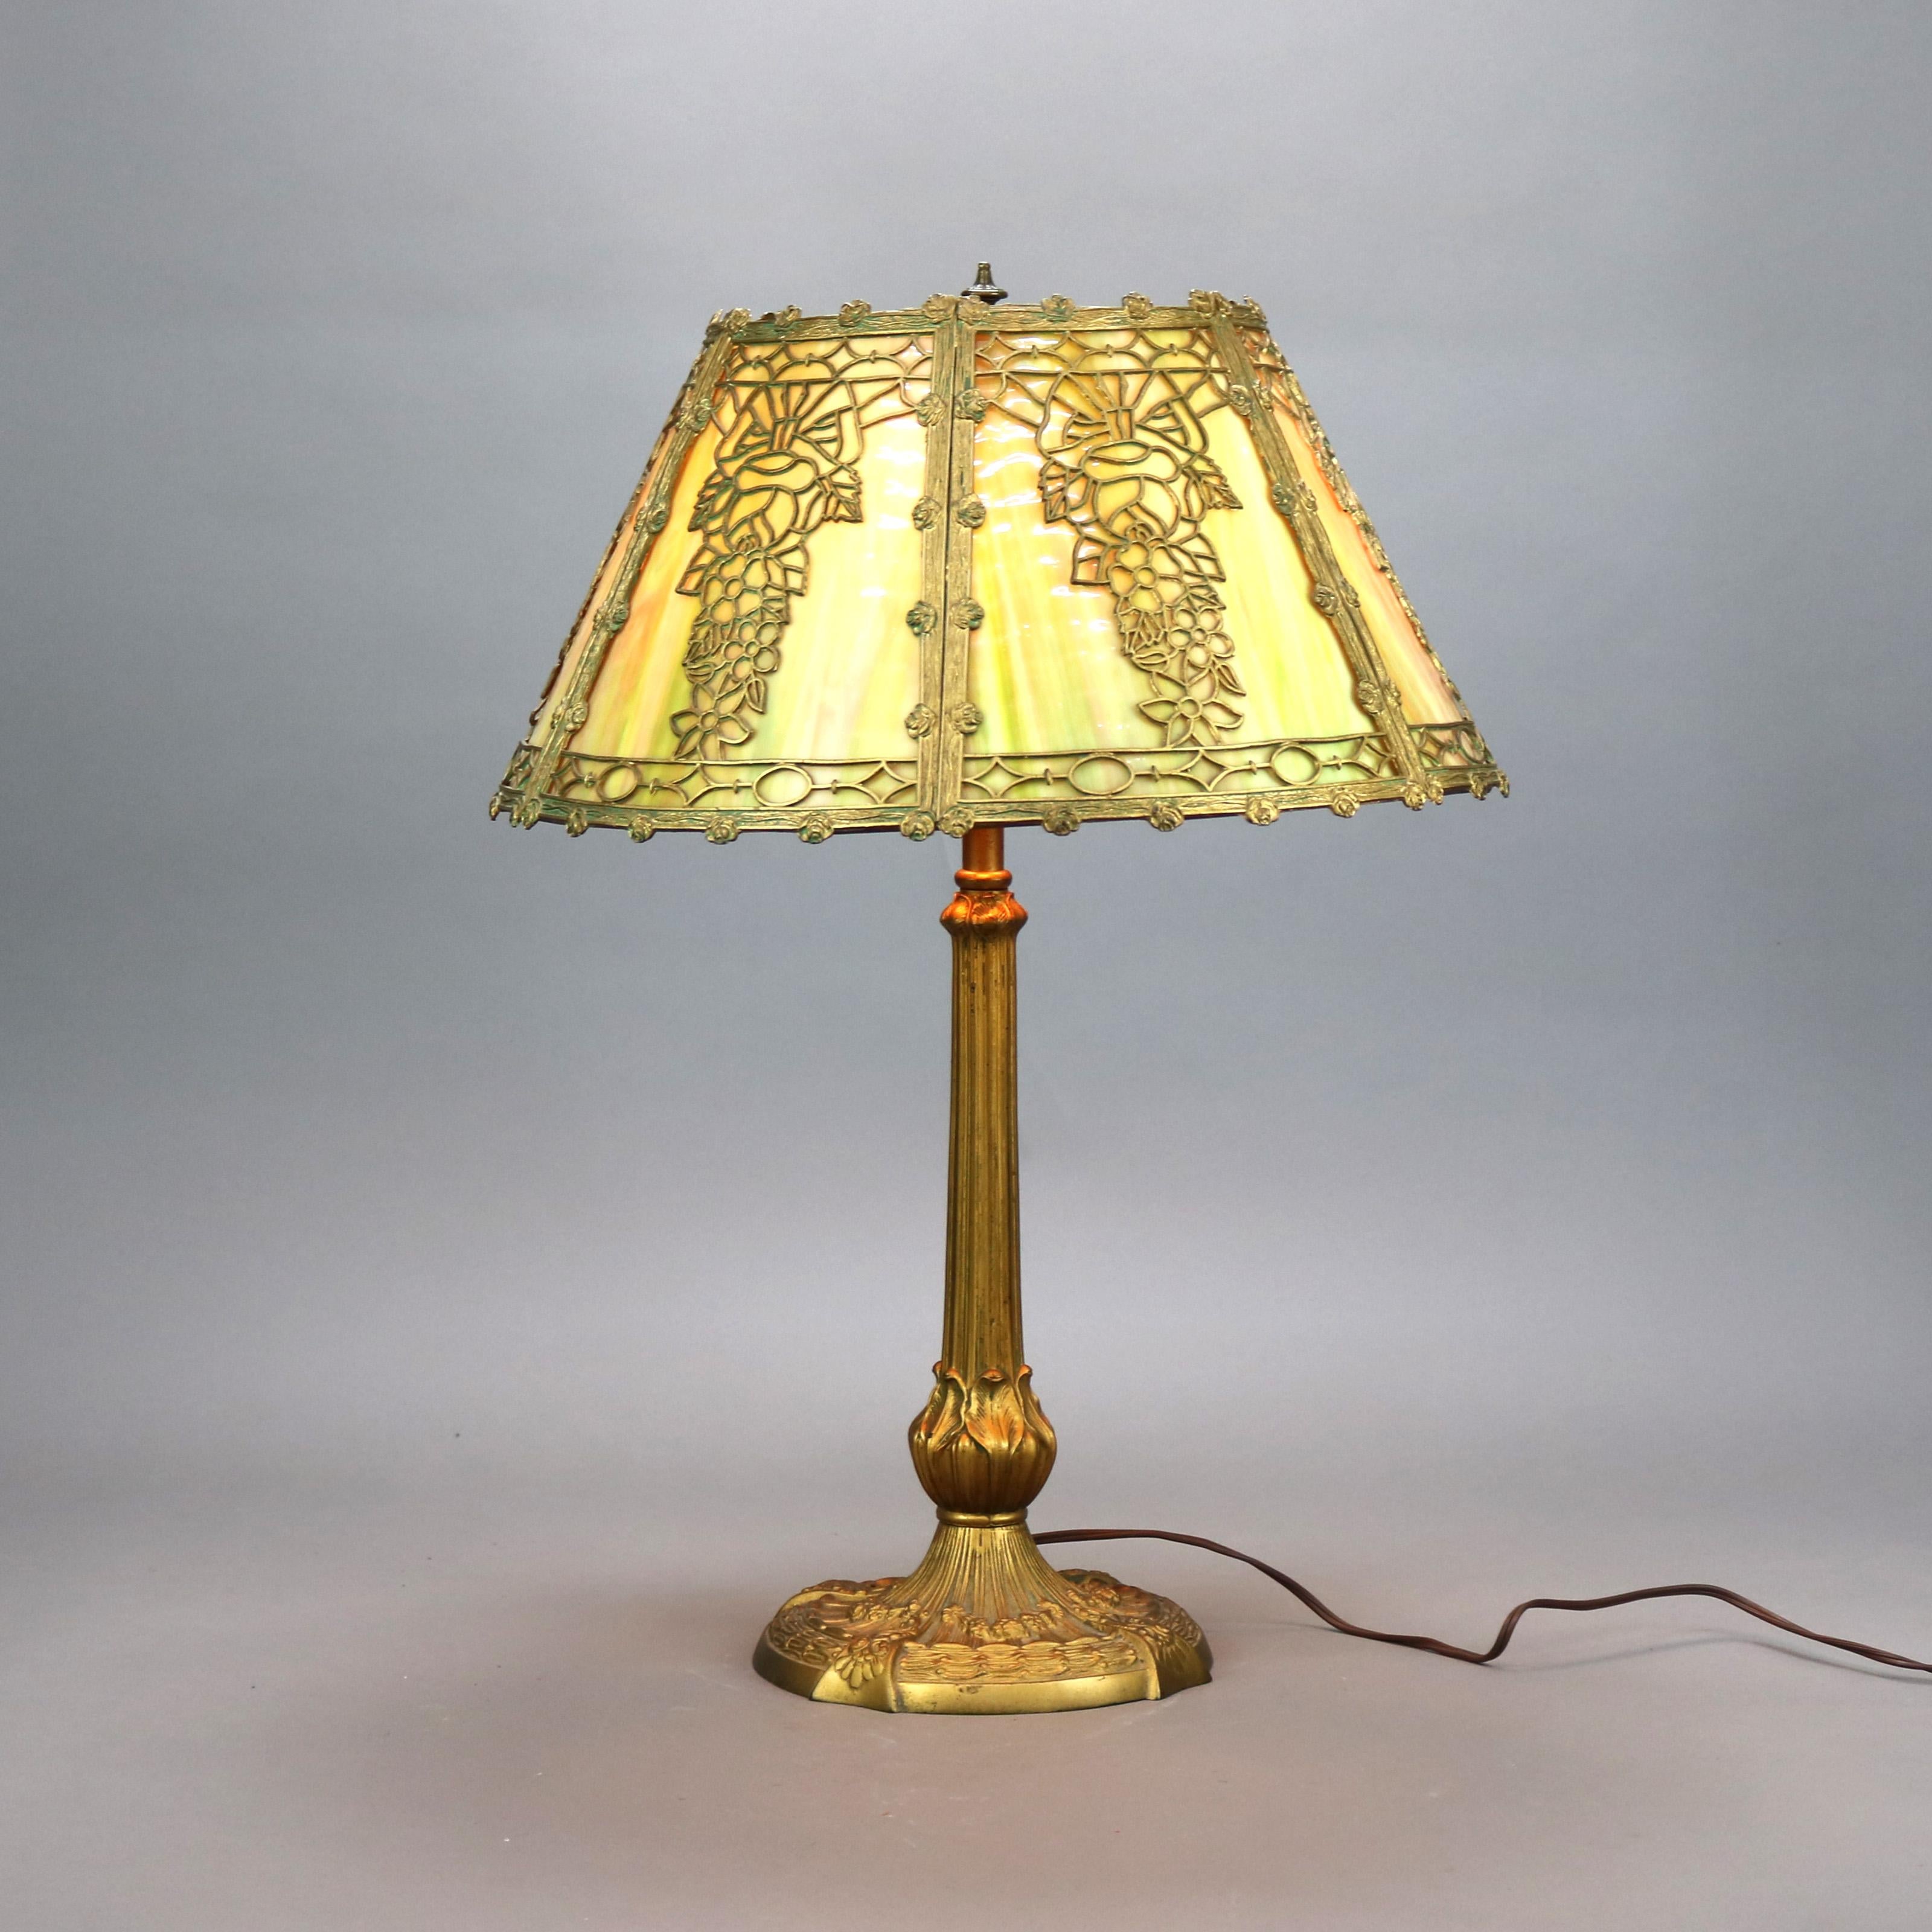 An antique Arts and Crafts table lamp by Miller Lamp Co. offers floral filigree cast shade housing slag glass panels over cast triple socket base, maker mark on base as photographed, c1920

Measures - 25''H x 18.5''W x 18.5''D.